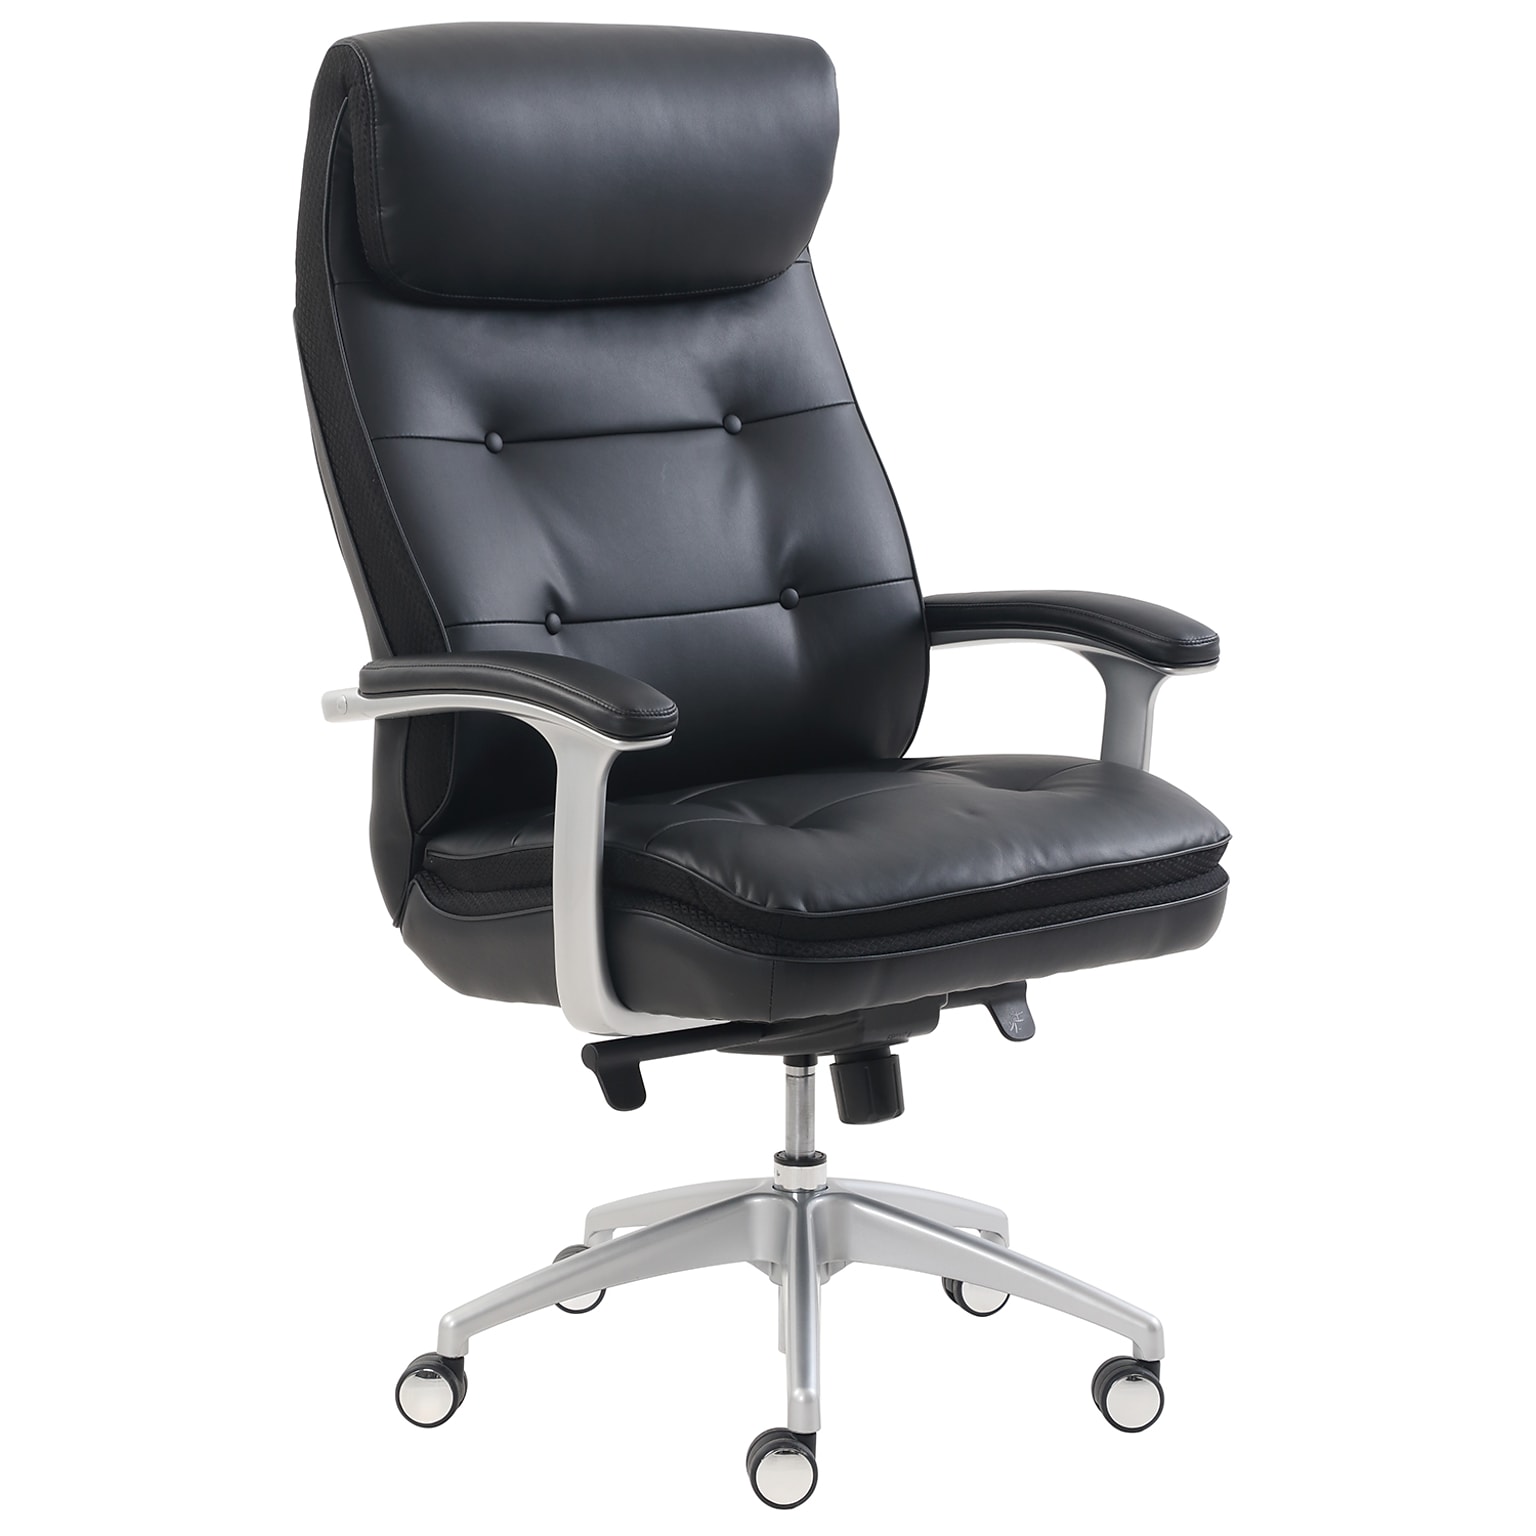 Beautyrest Royo Big & Tall Bonded Leather Executive Chair, Black (60003)